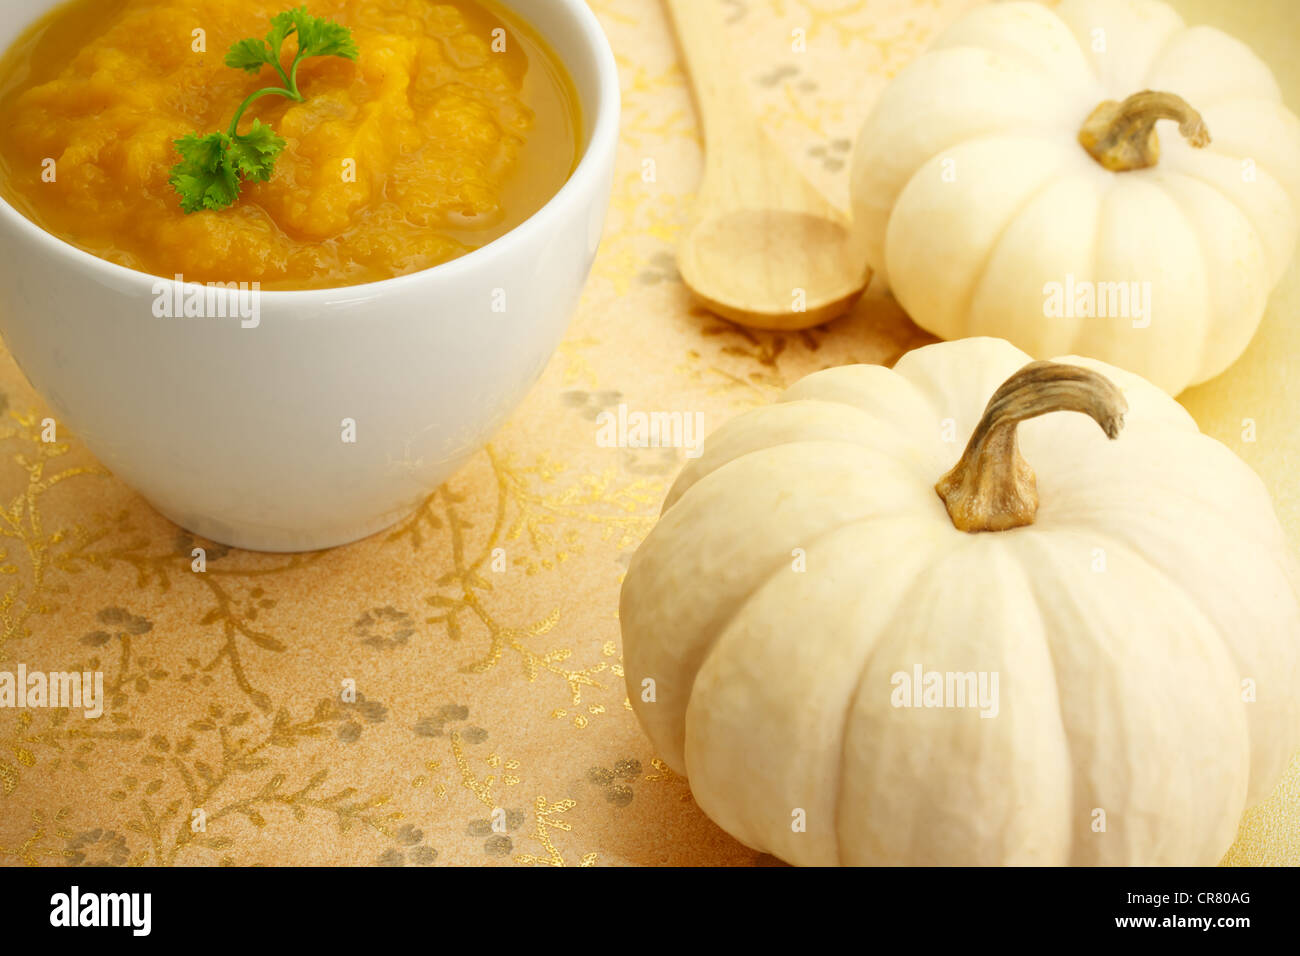 Two Pumpkins with Pumpkin Soup Stock Photo